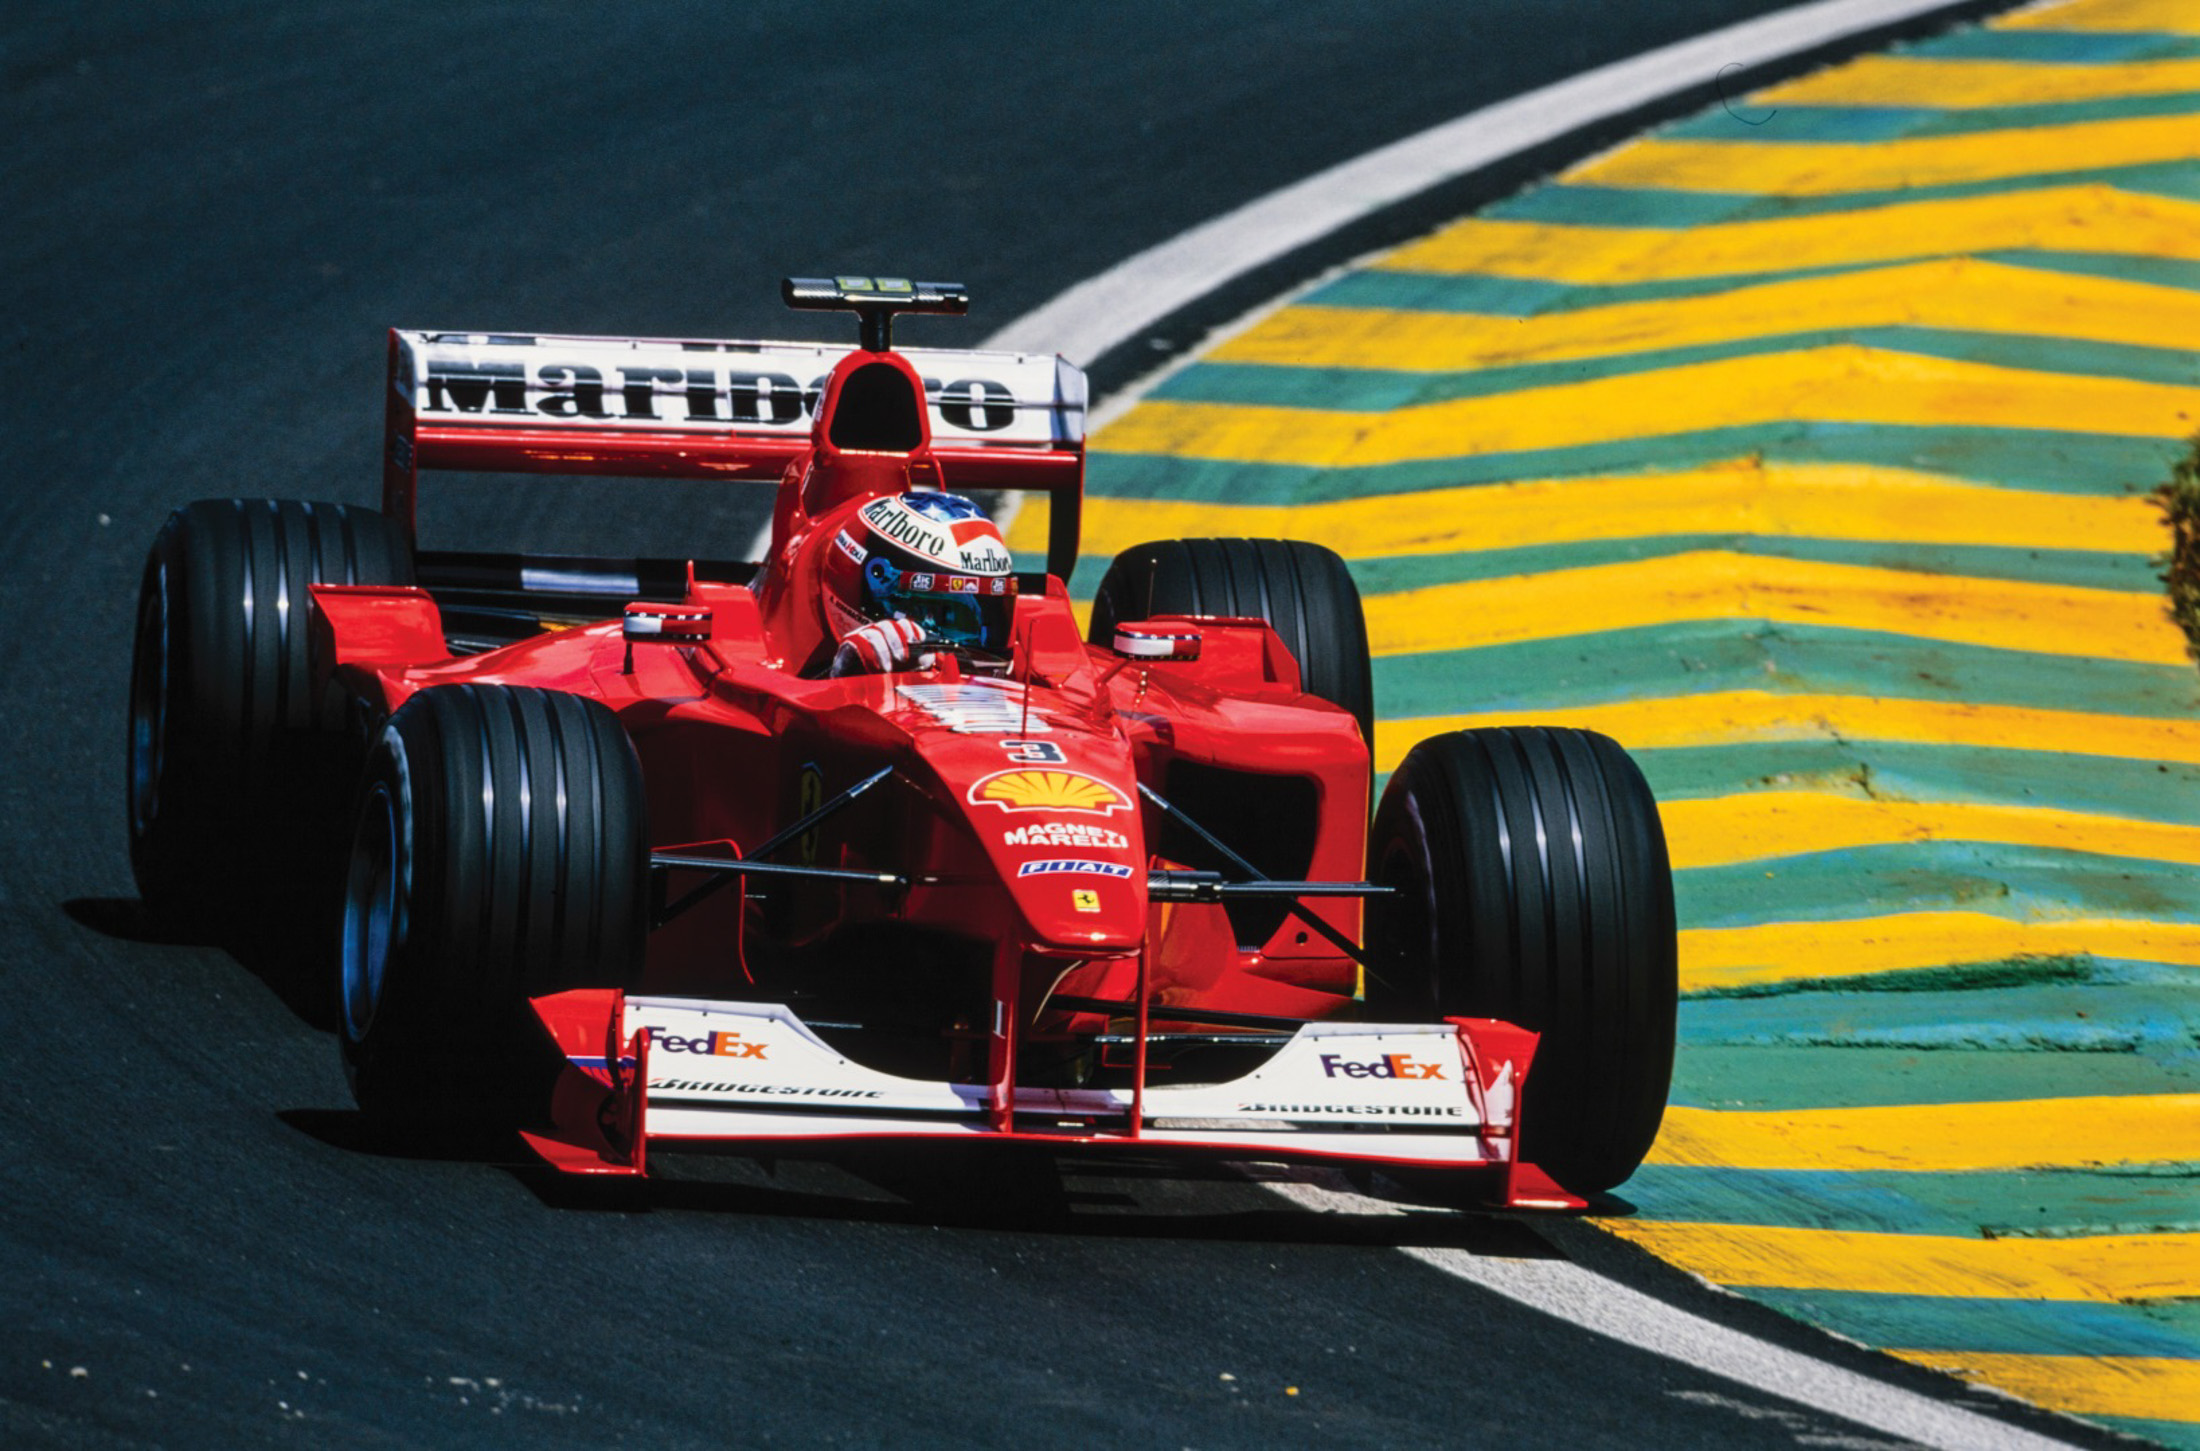 Michael Schumacher drove this Ferrari F1-2000 to victory&nbsp;at the 2000 Brazilian Grand Prix.&nbsp;The car, which won Schumacher his first World Championship&nbsp;season and Ferrari’s 2000 Formula One Drivers’ World Championship, sold for an undisclosed sum on April 12 in Hong Kong.&nbsp;